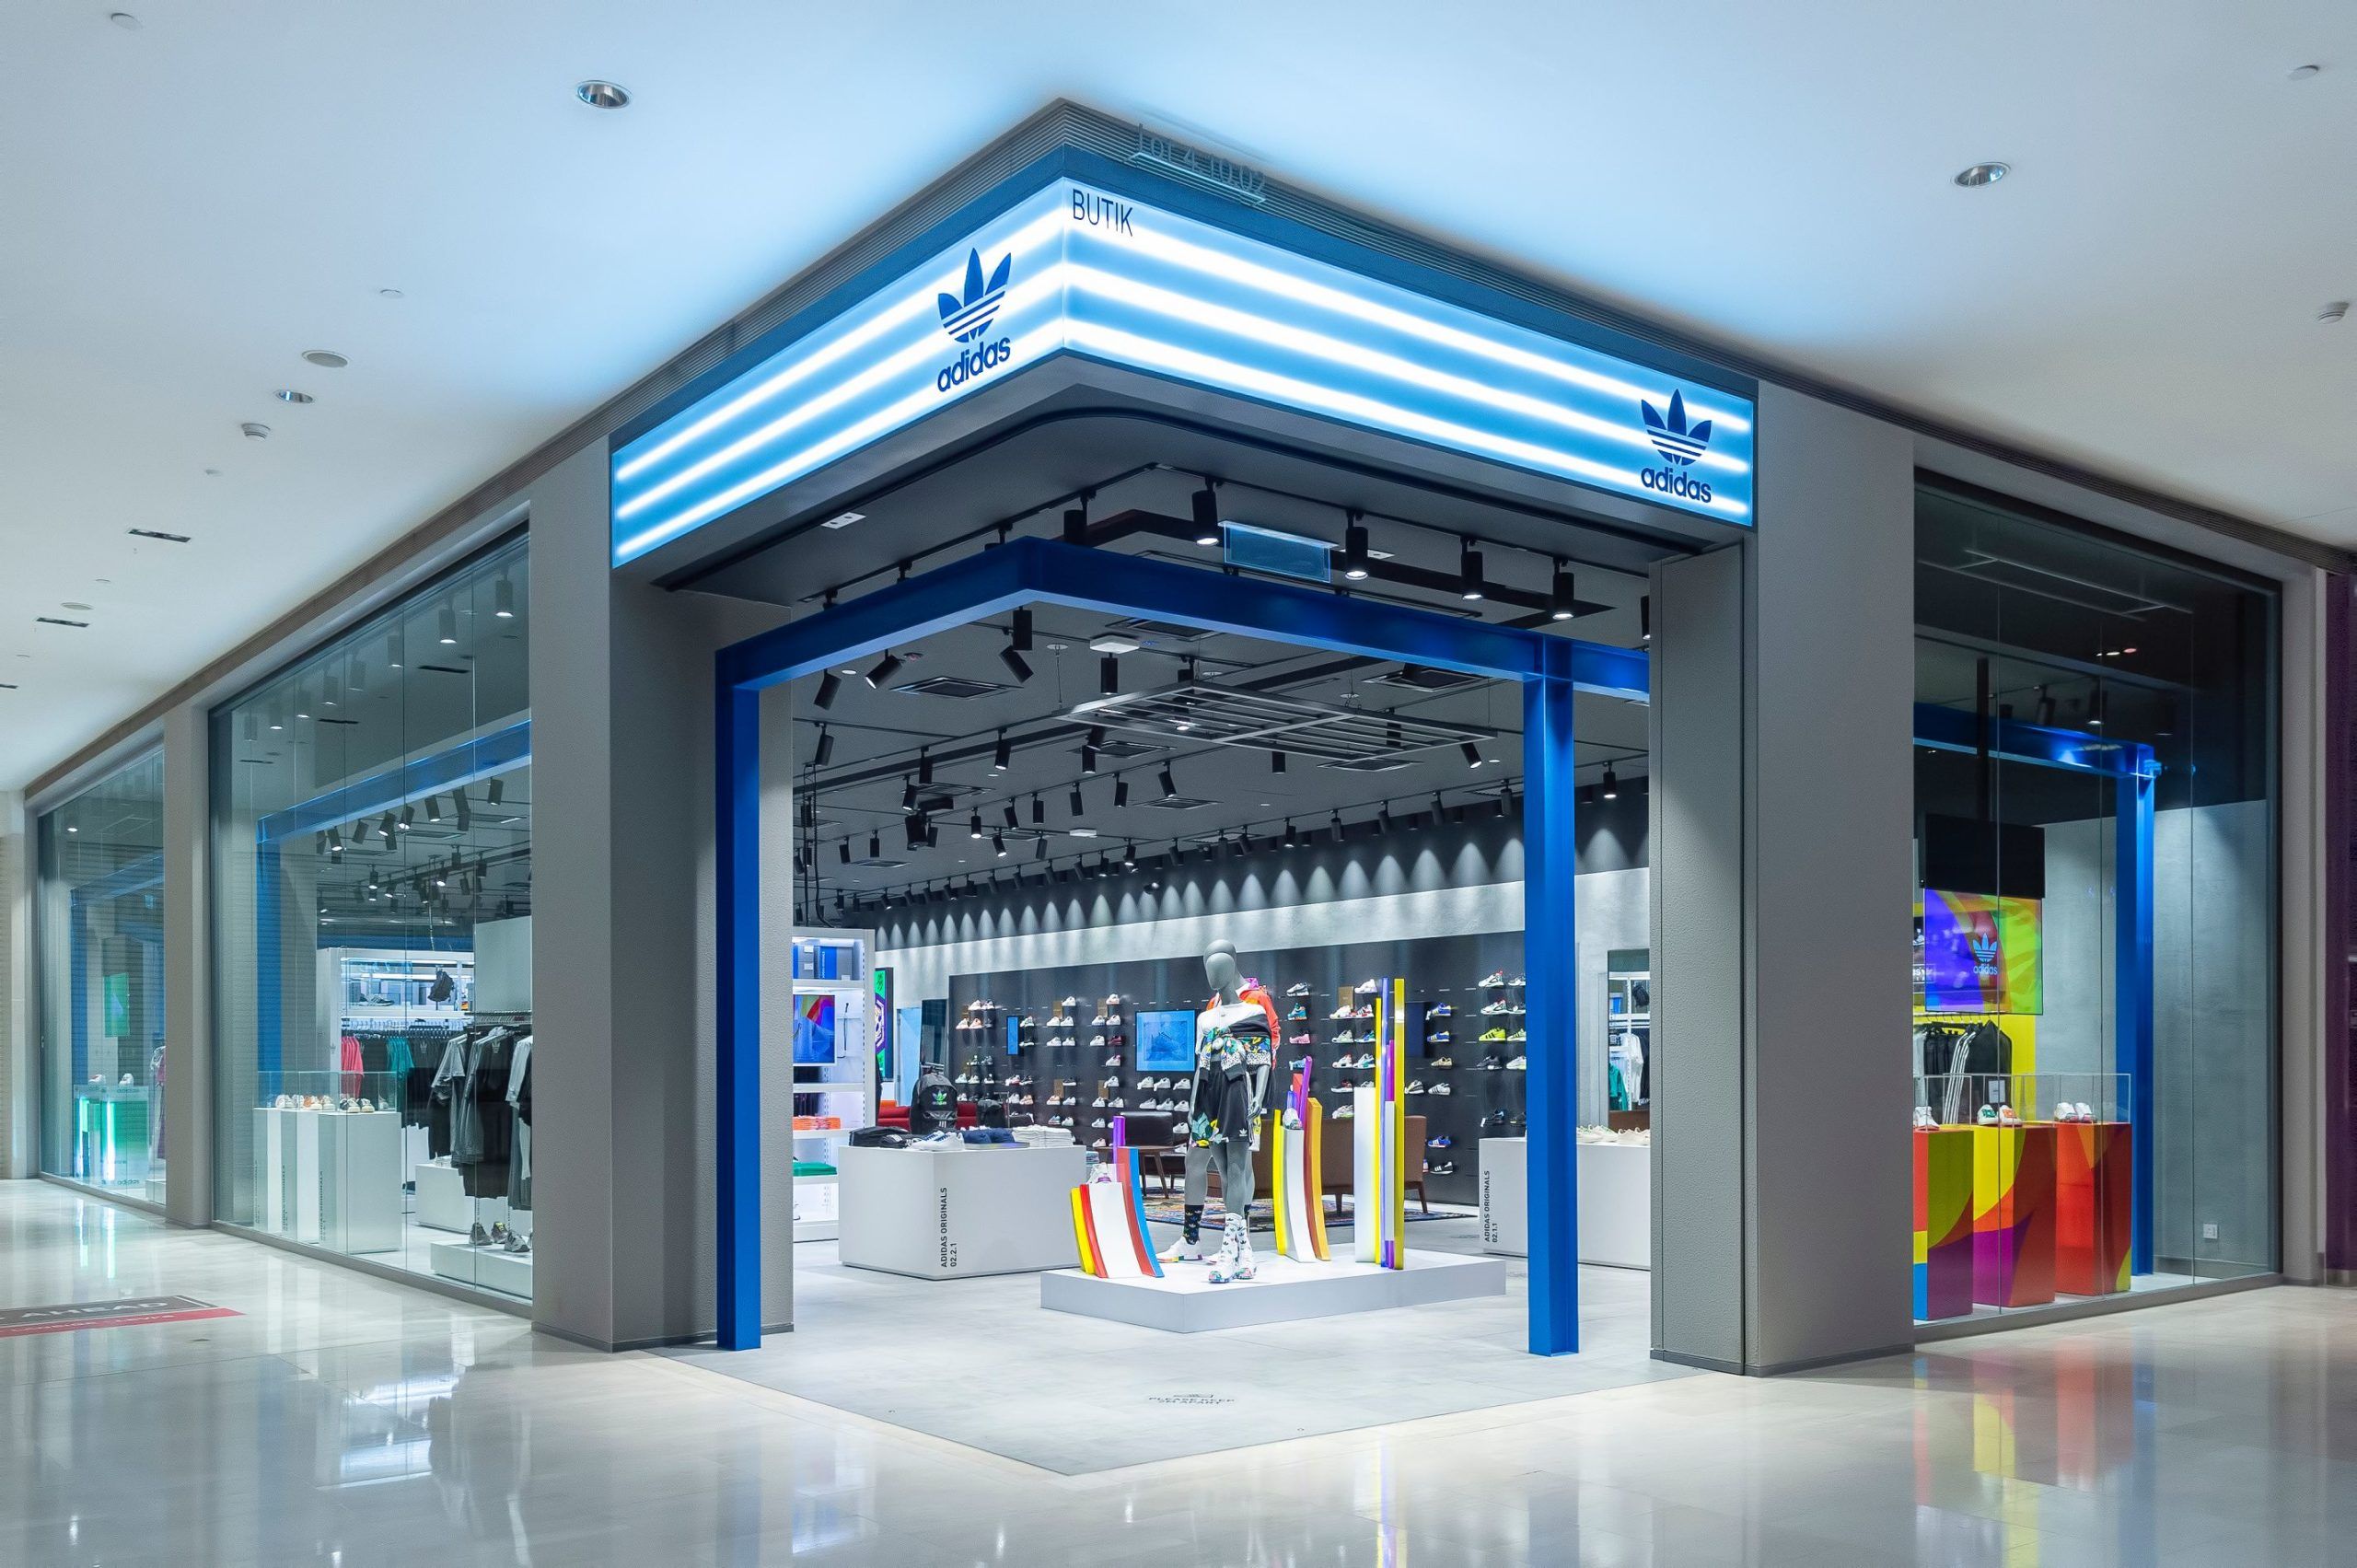 The Adidas Originals flagship store in Pavilion KL is its largest yet